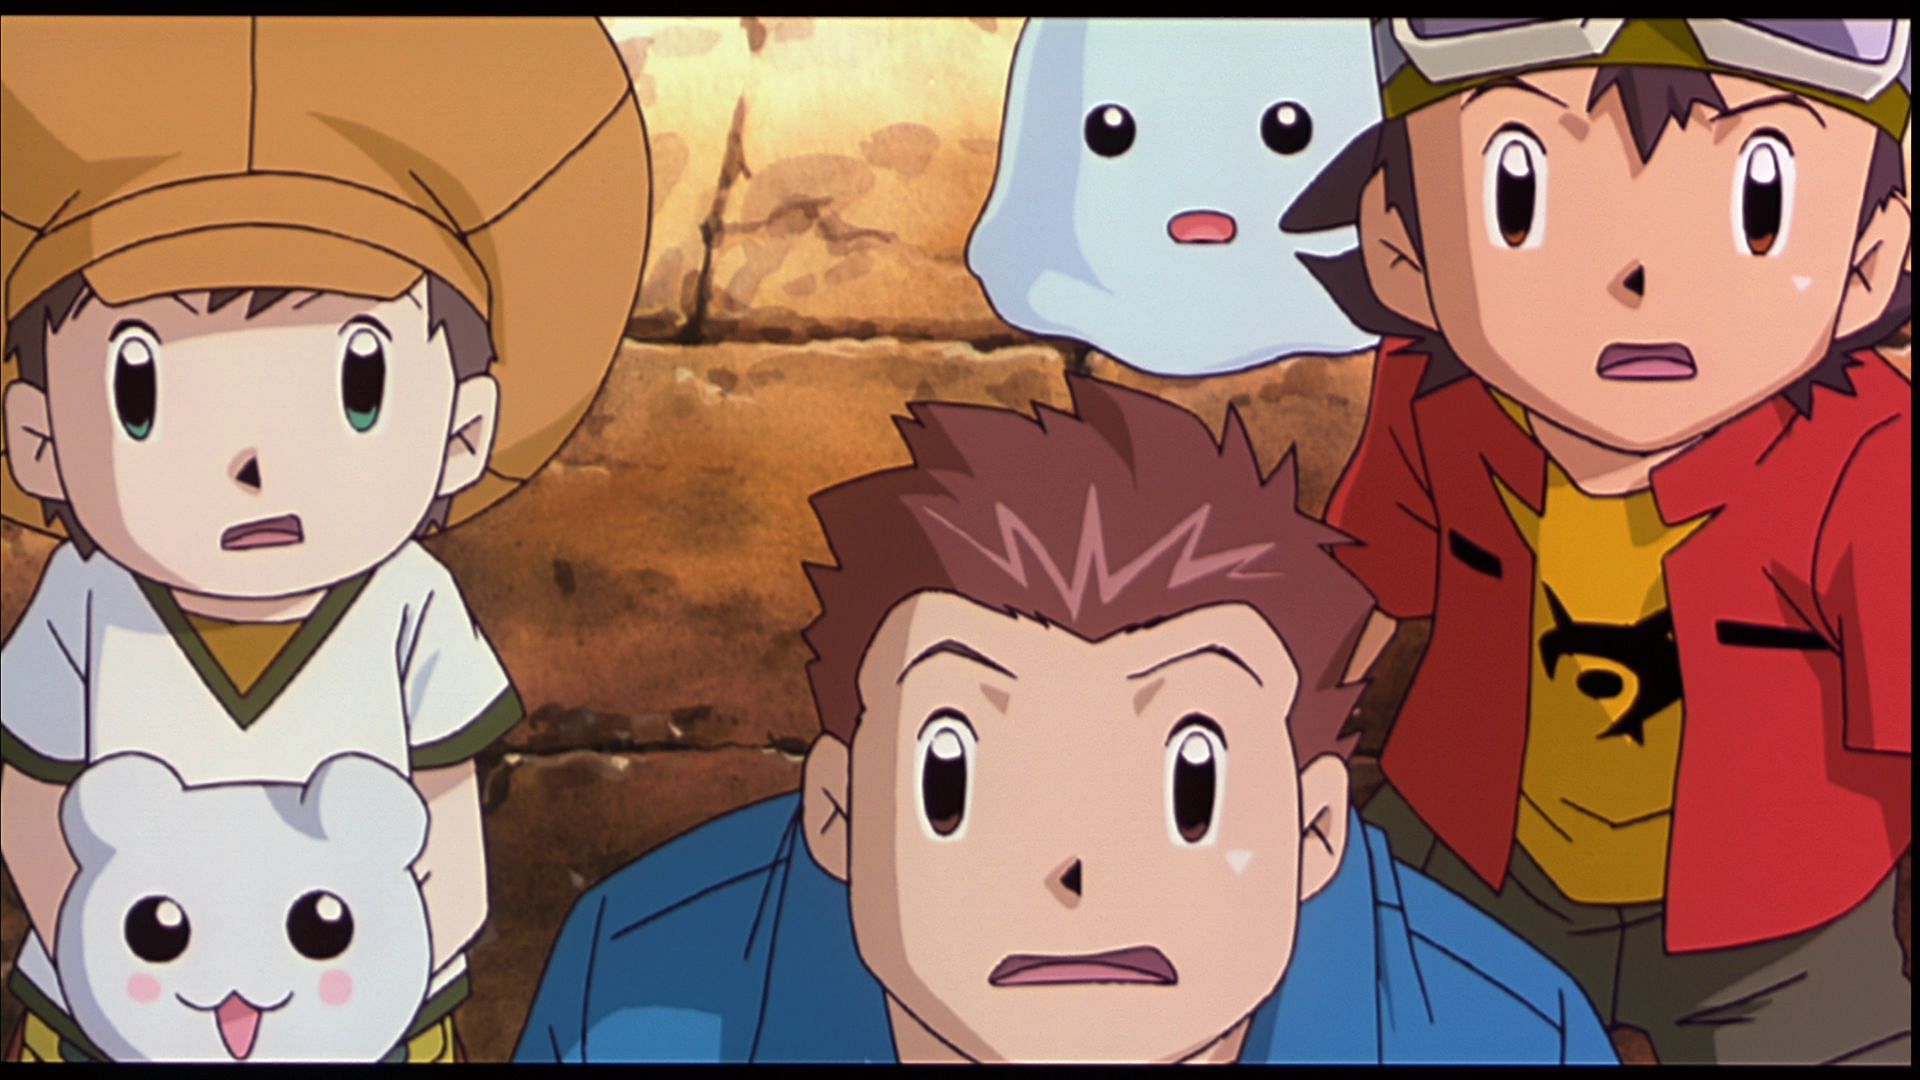 These kids may look weak, but they become mighty warriors (Image credit: Sukehiro Tomita, Digimon Frontier)